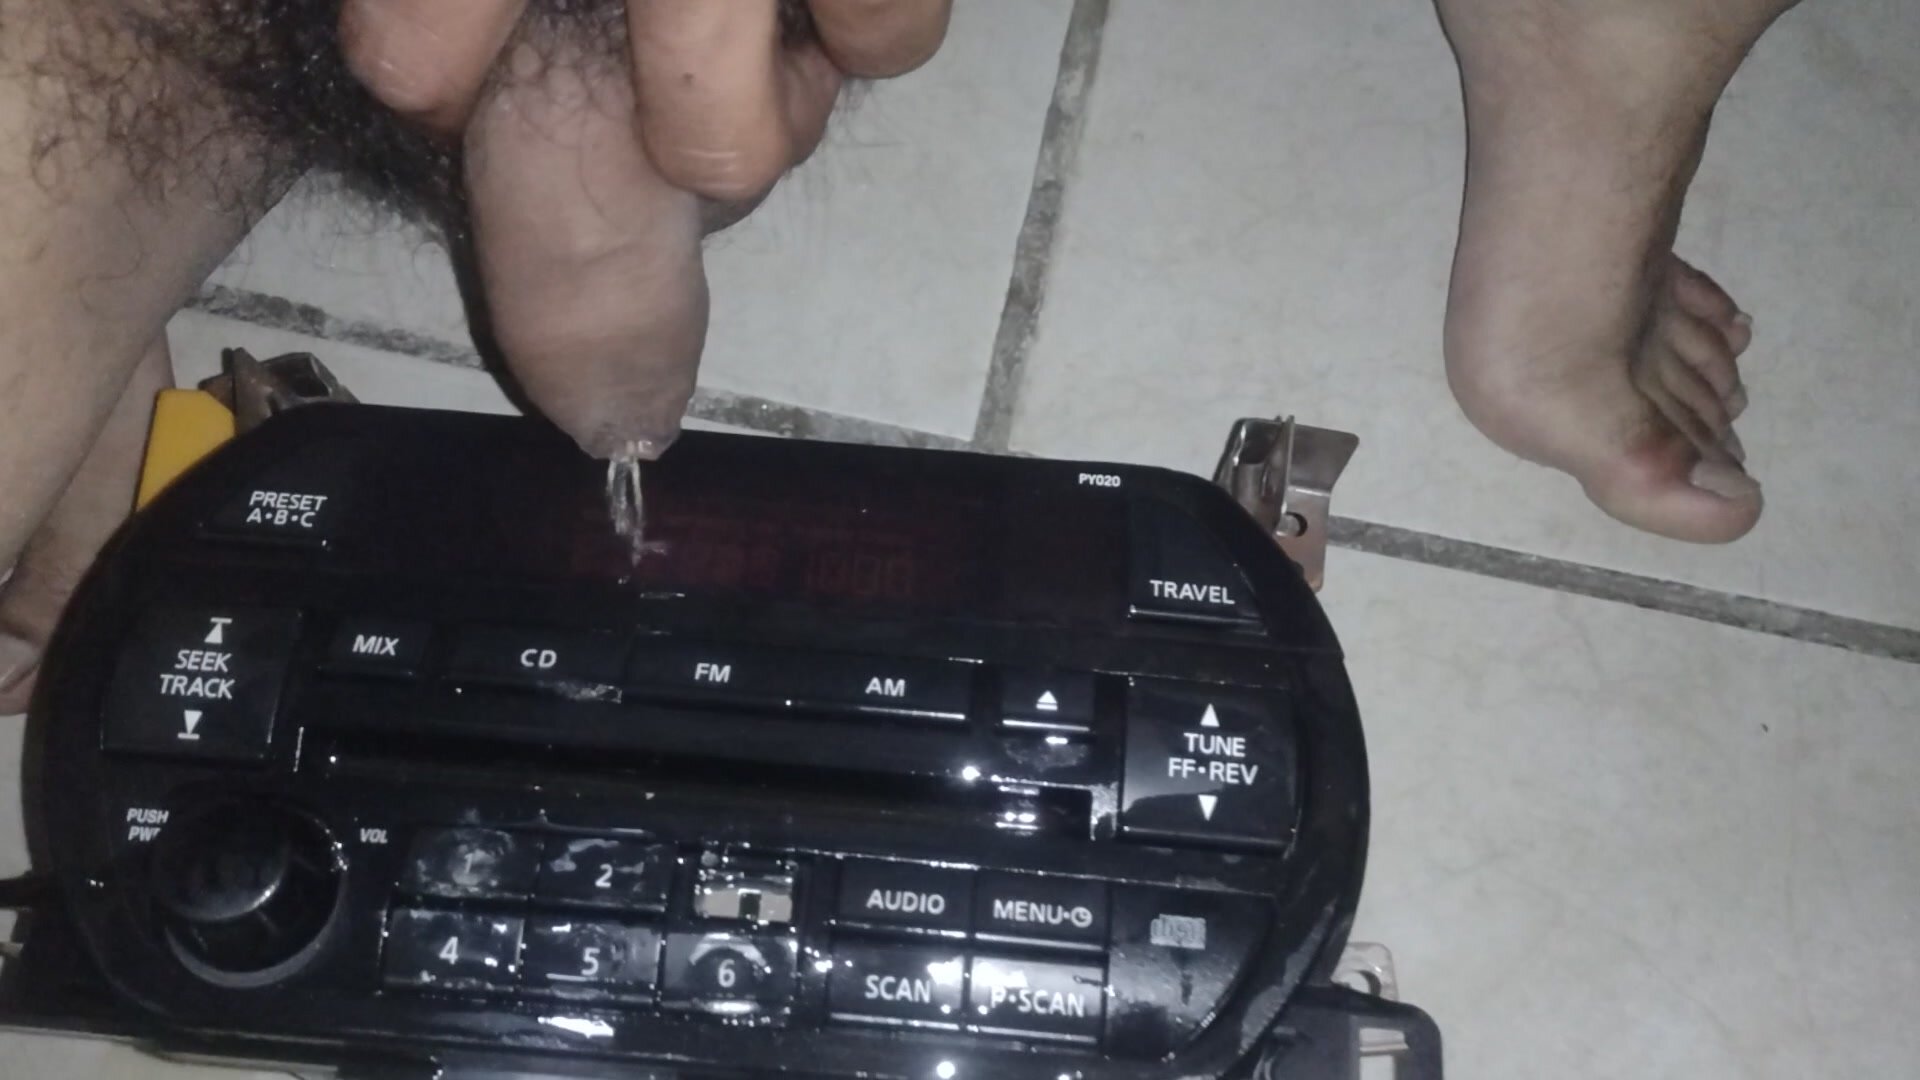 Car stereo soaked in teenager's piss